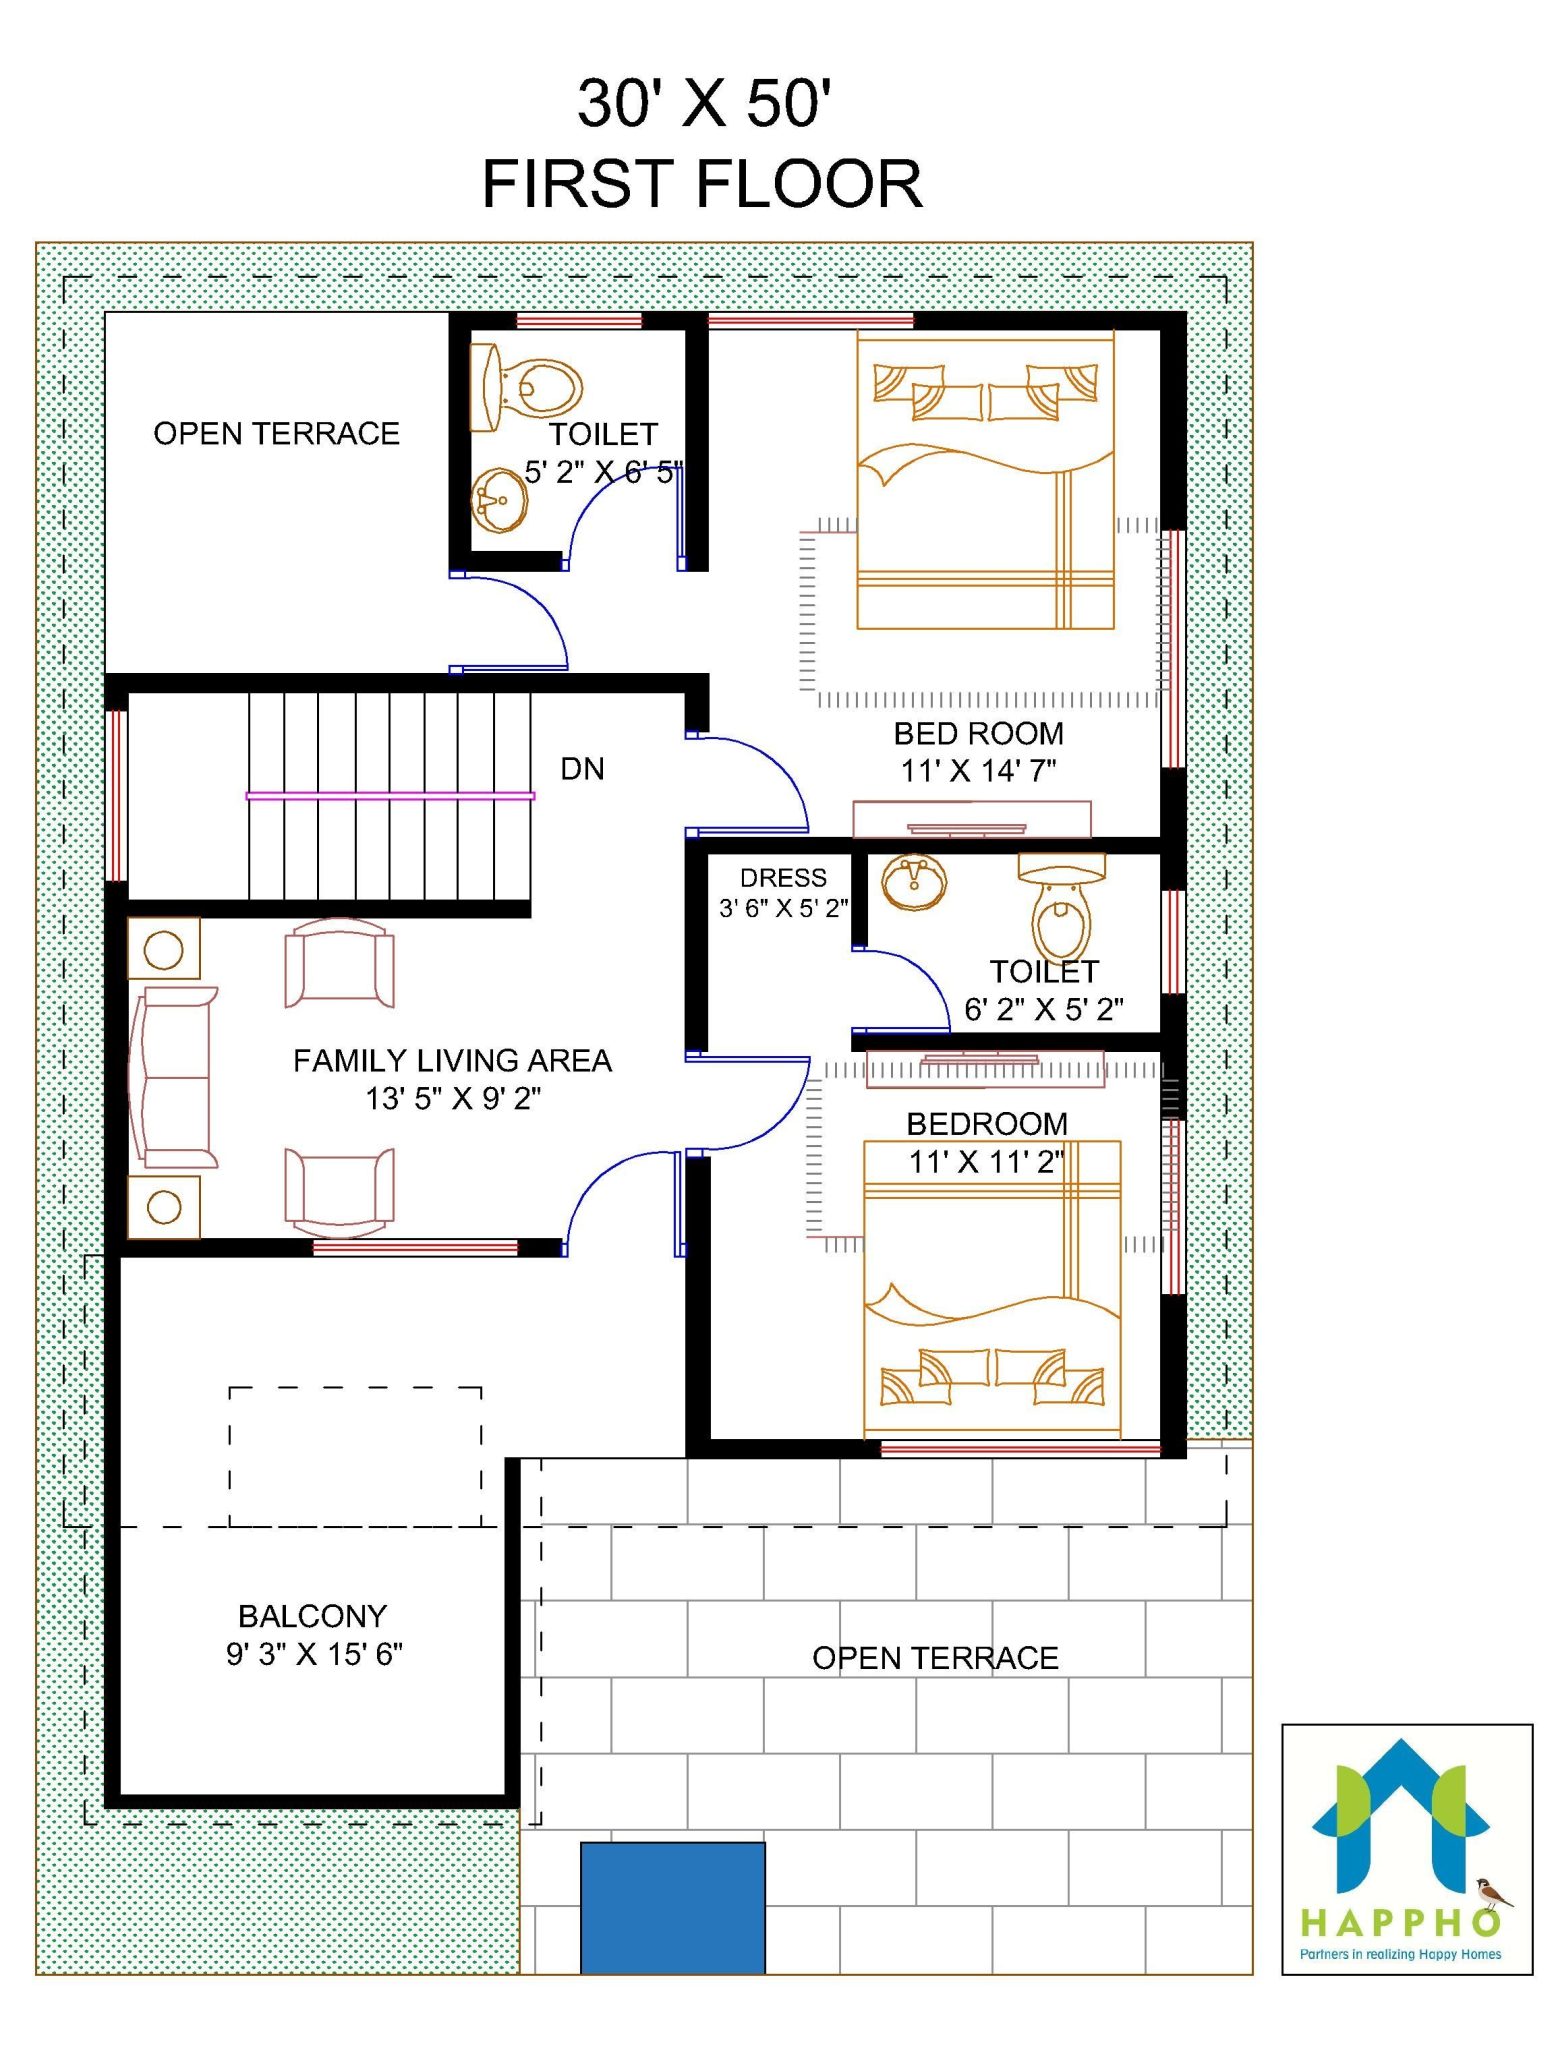 First floor plan, 1500 Square feet, 166 square yards, 4 bhk floor plan, 30 feet x 50 feet, Duplex floor plan